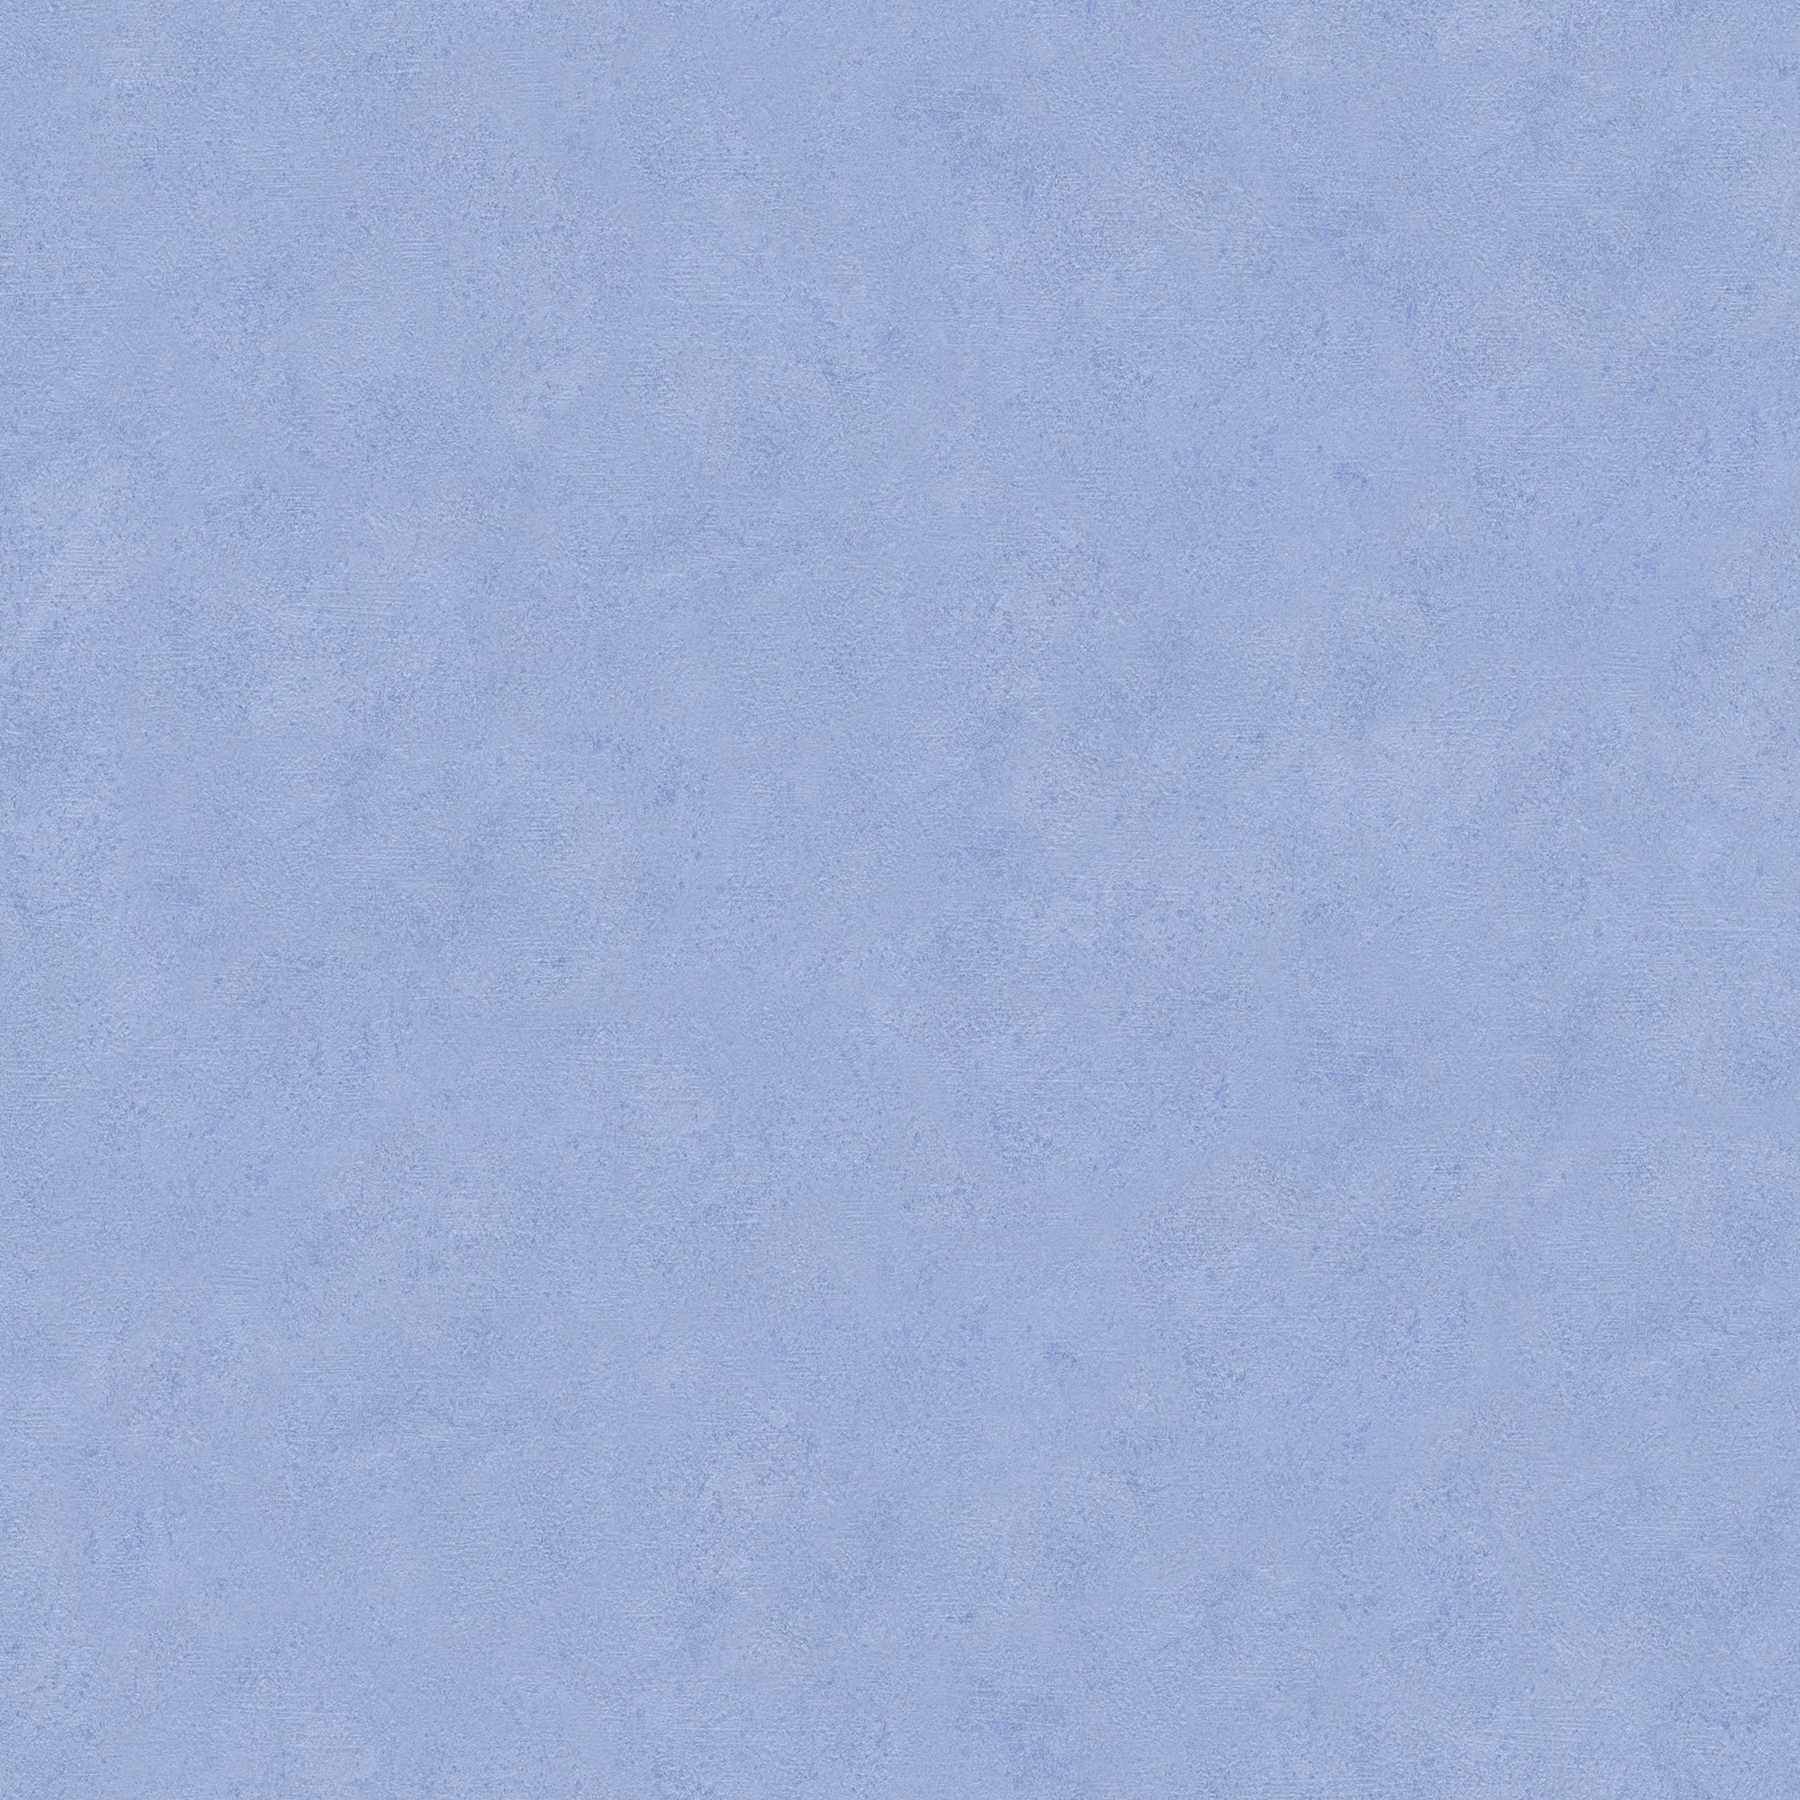 Blue paper wallpaper with hatching & texture pattern - Blue
